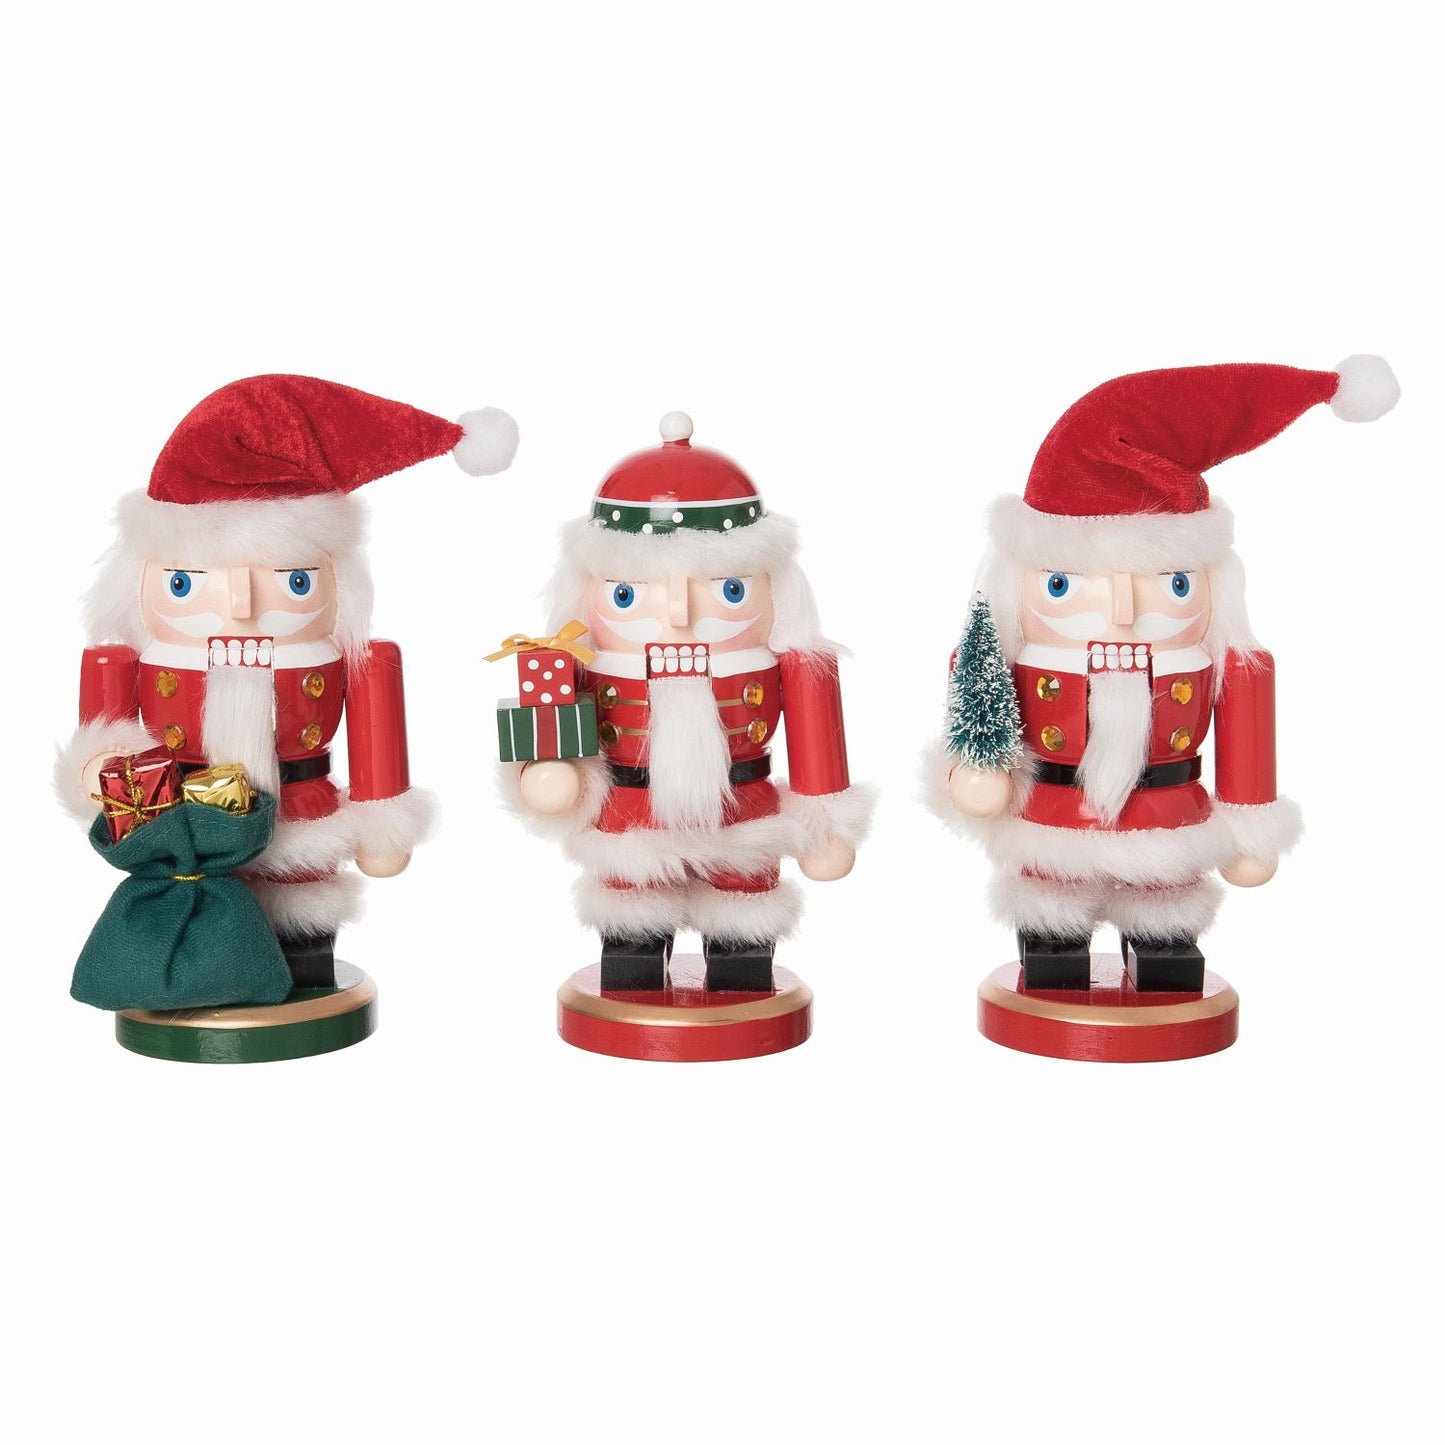 Transpac Wood Short Stack Santa With Gifts, Set Of 3, Assortment